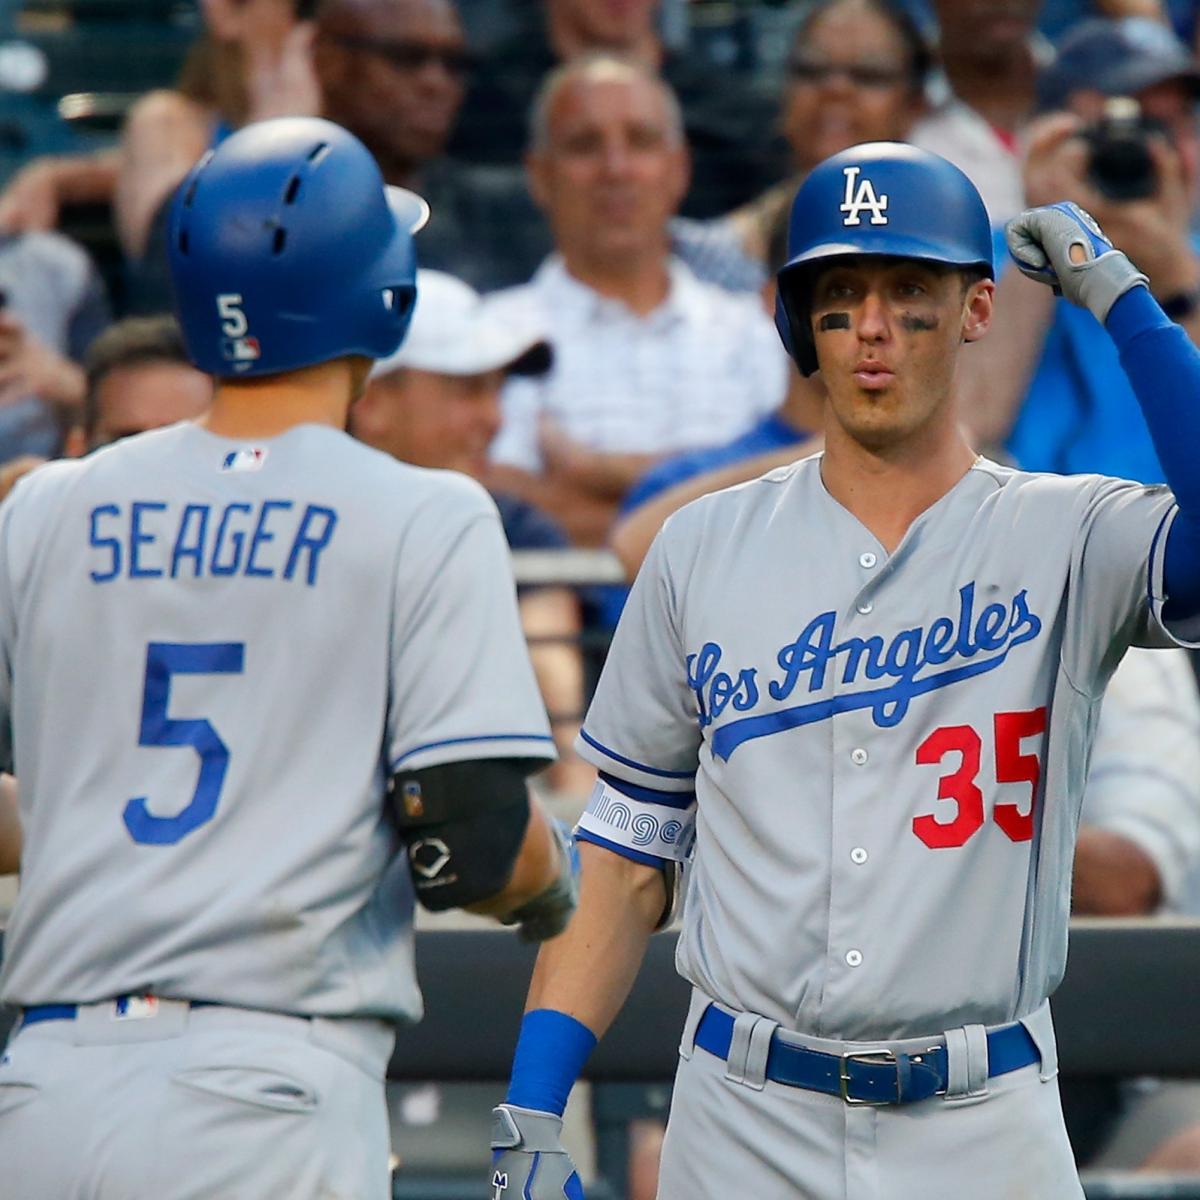 It's time for Cody Bellinger and Corey Seager to produce in the postseason  - The Athletic